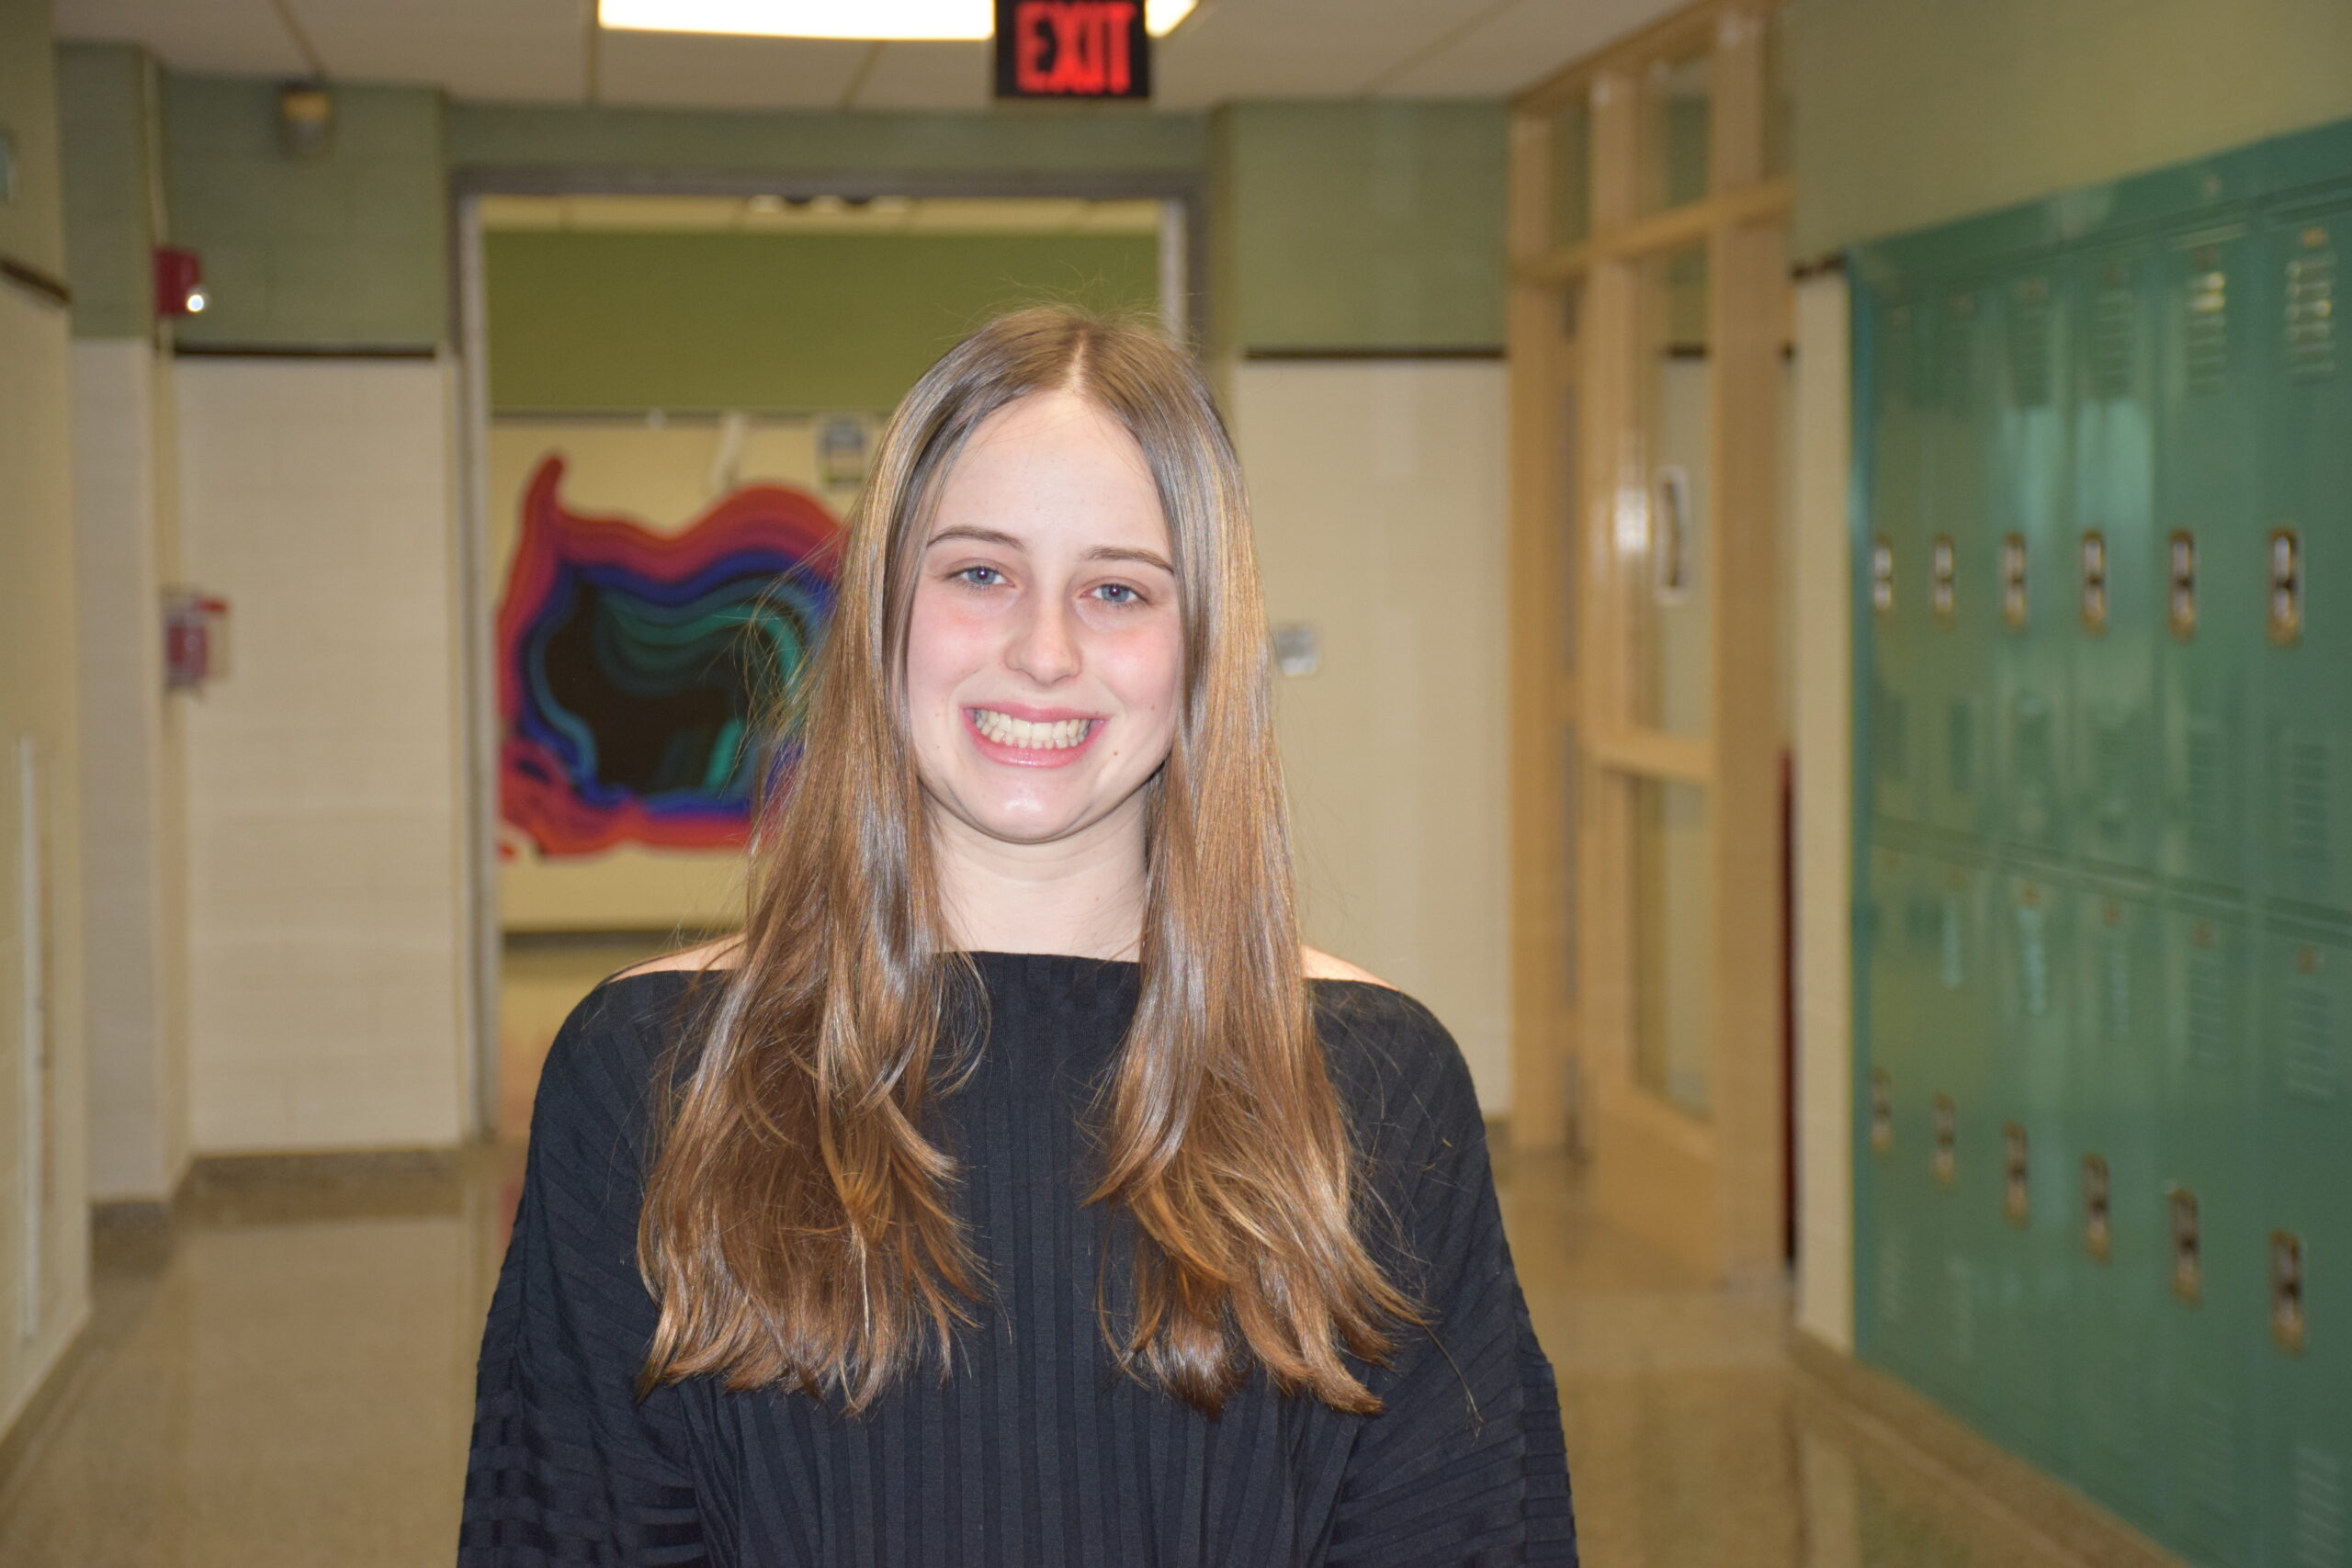 The work of Westhampton Beach High School senior Morgan Donahoe was recently published in the scientific journal BMC Public Health.